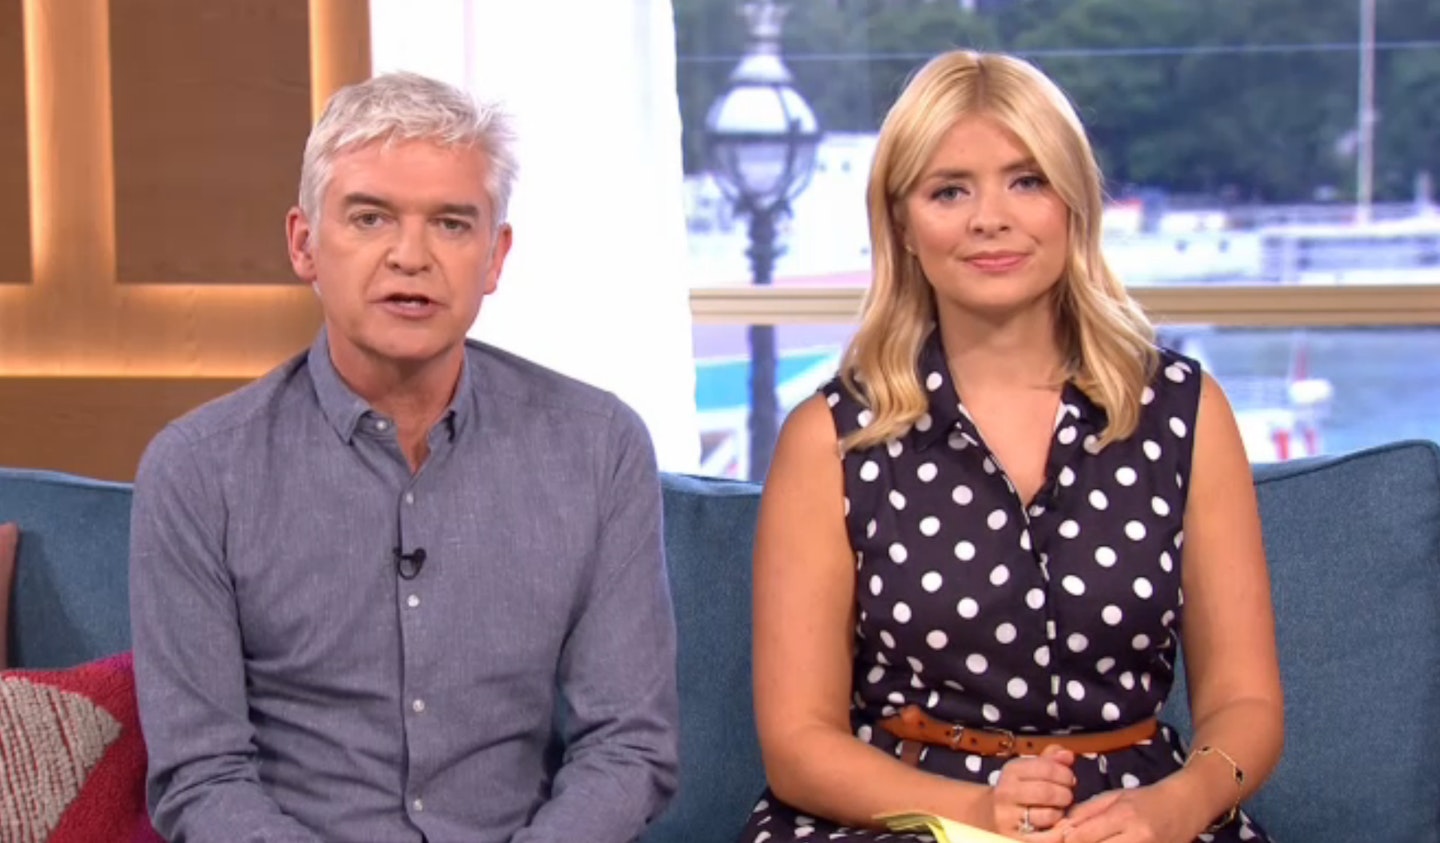 Holly WIlloughby and Phillip Schofield